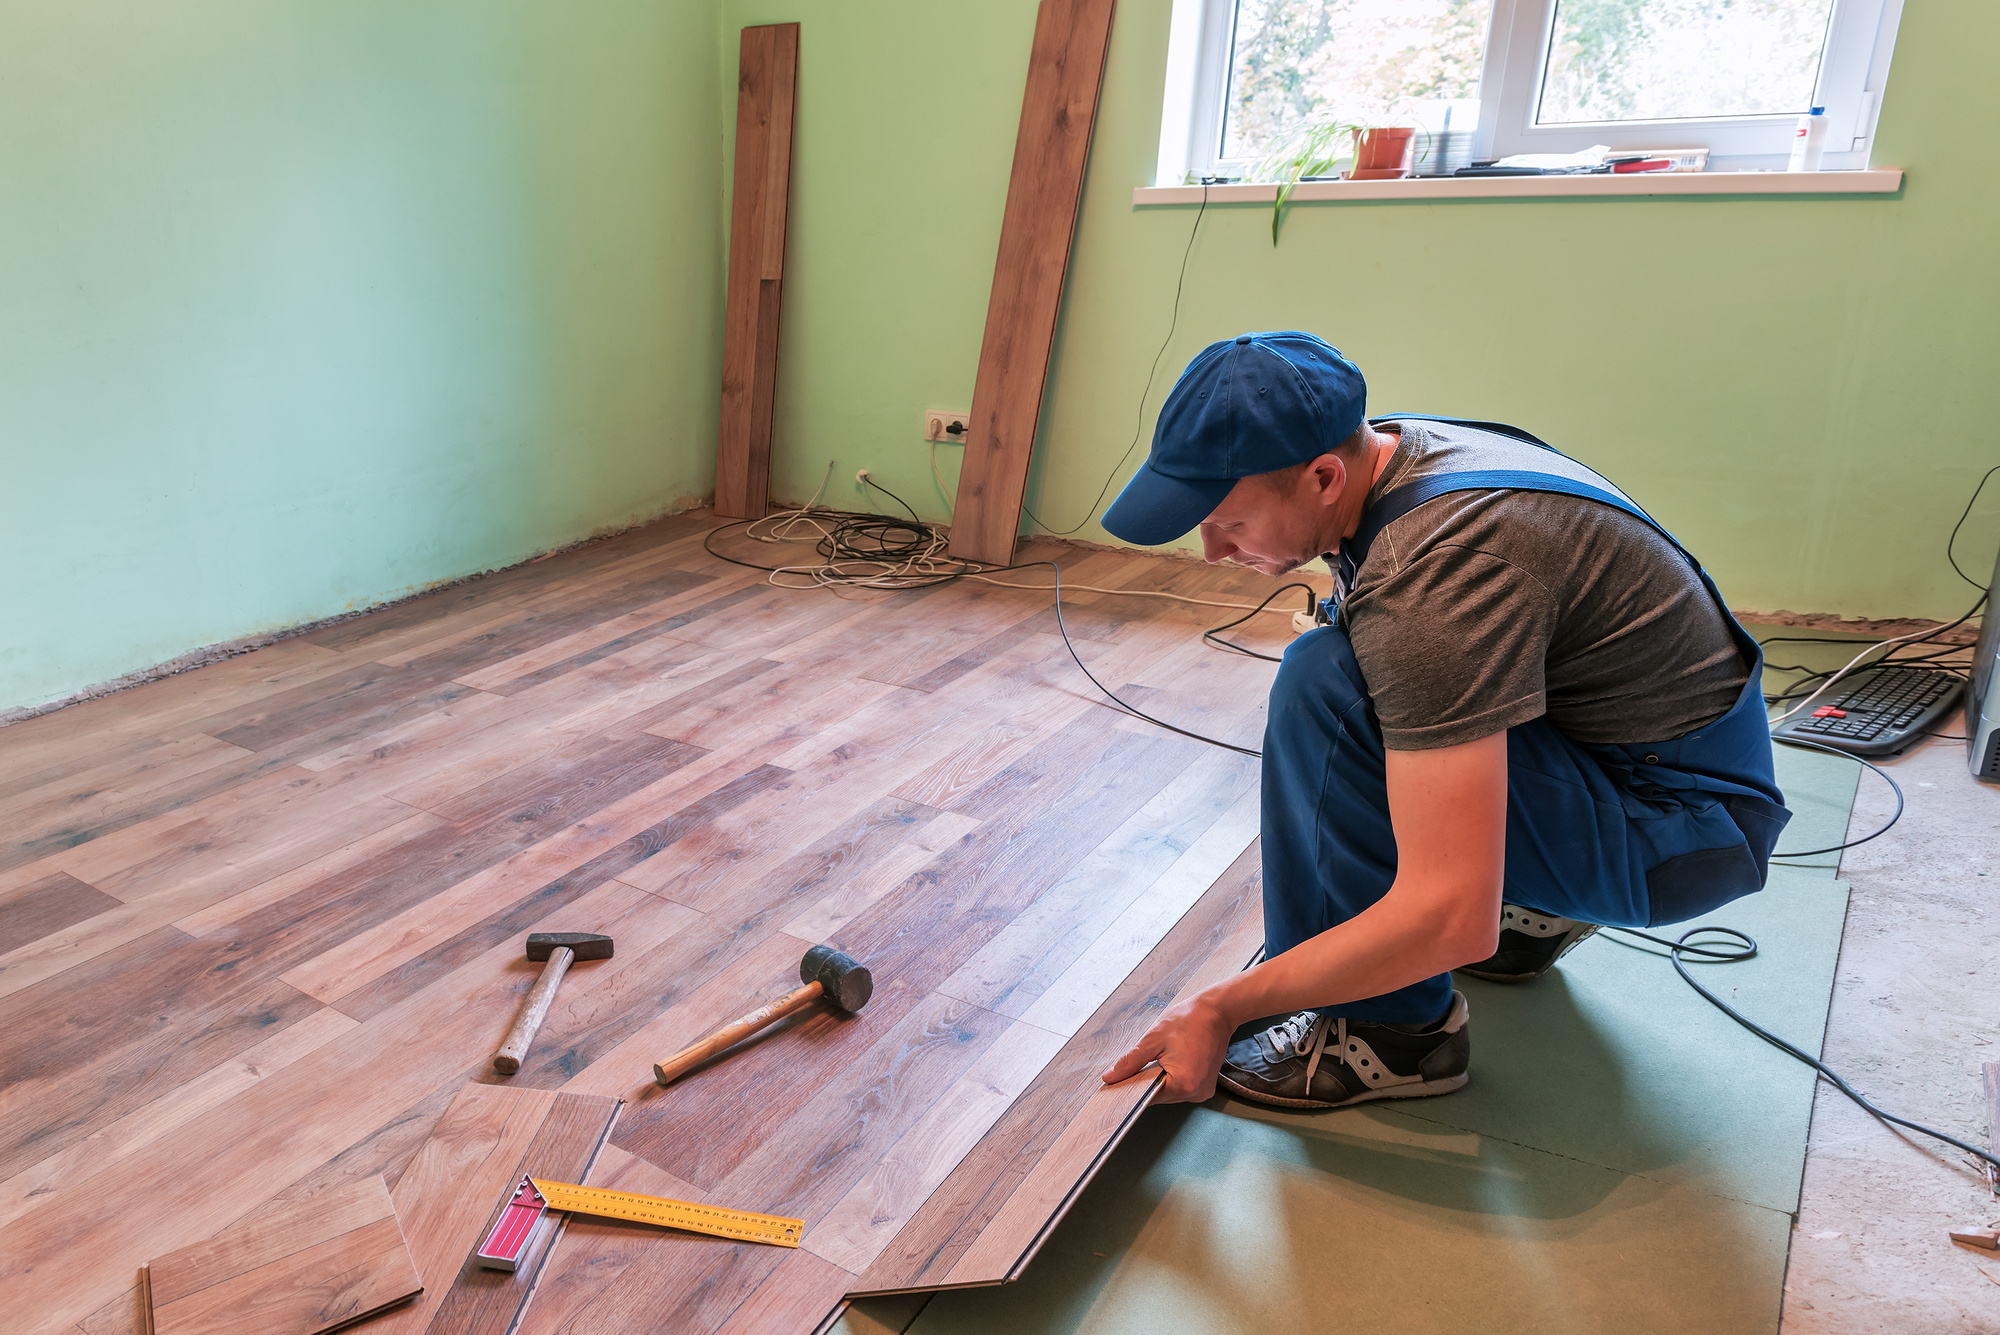 Hardwood floor installation near me: Do you want to know how to choose the right flooring contractor? Read on to learn how to make the right choice.